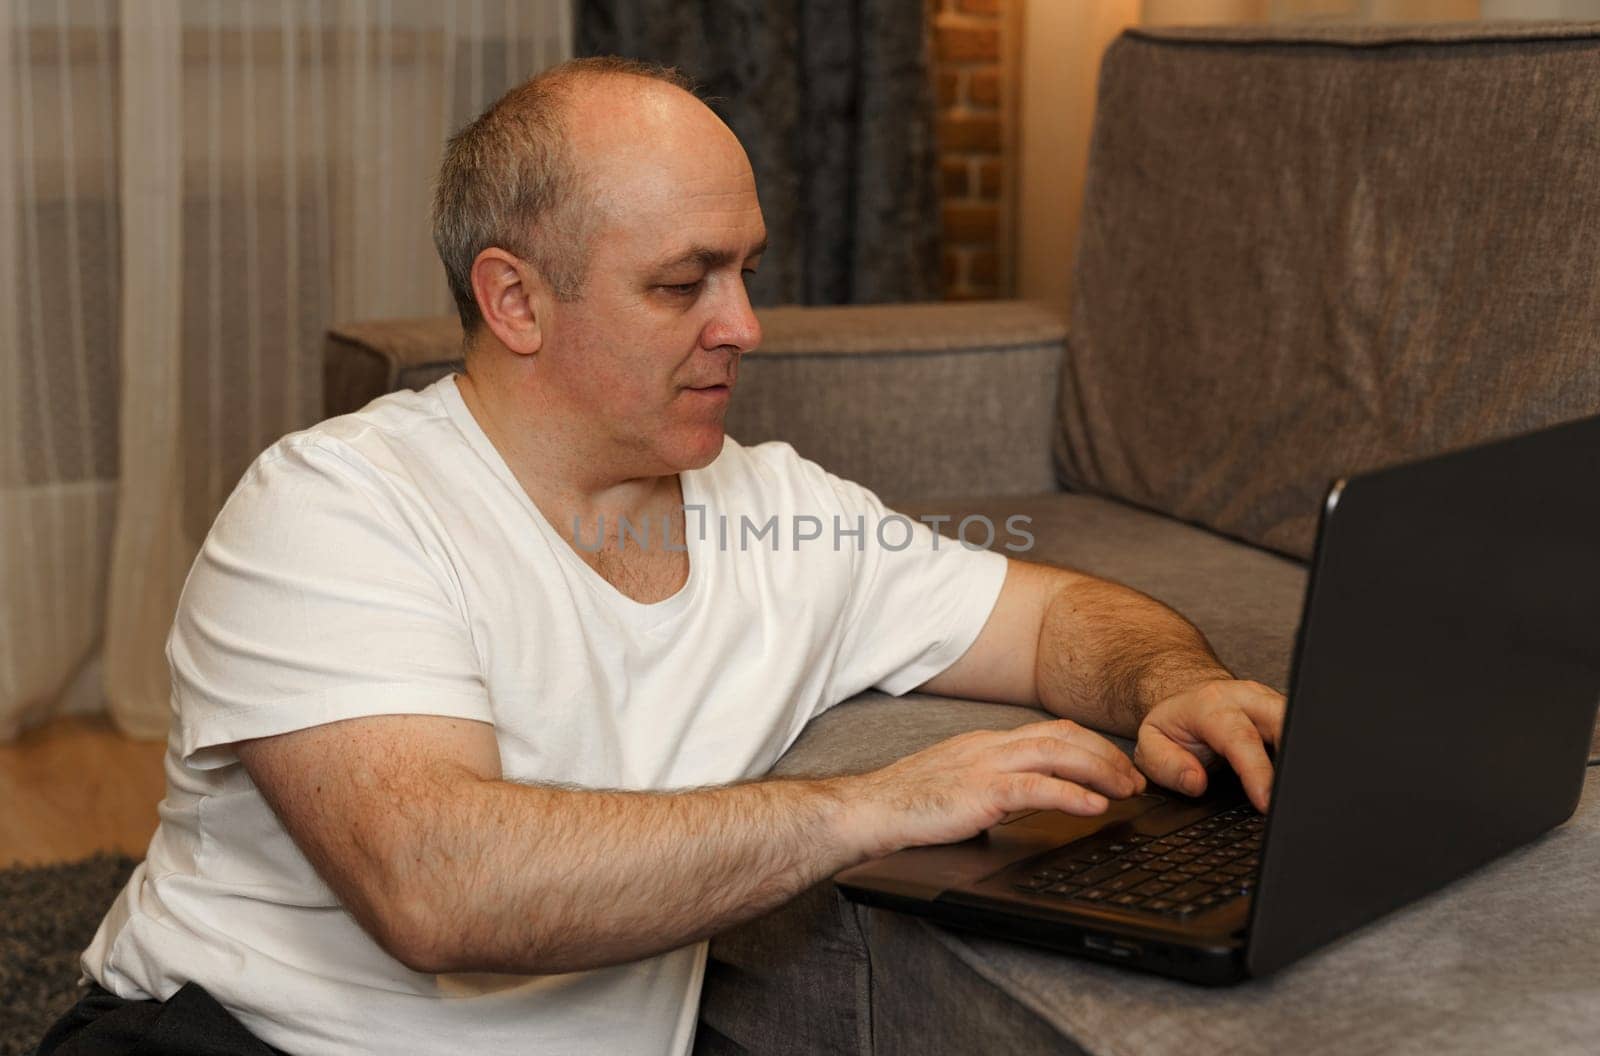 A mature man sits on the floor and works on a laptop that is on the sofa.